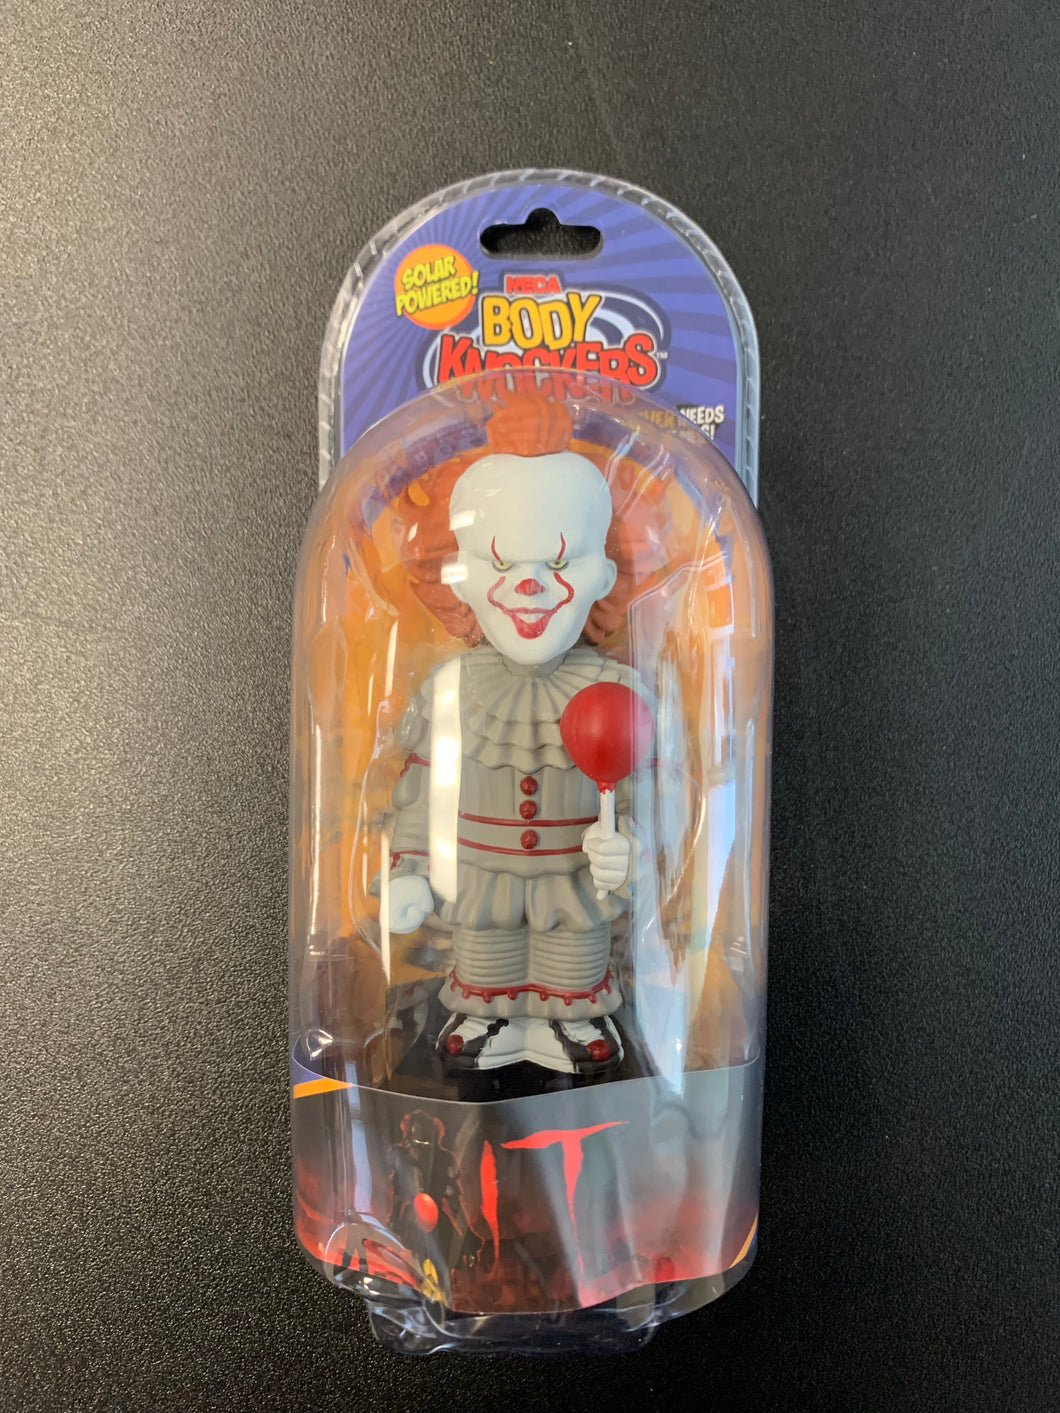 NECA BODY KNOCKERS IT PENNYWISE